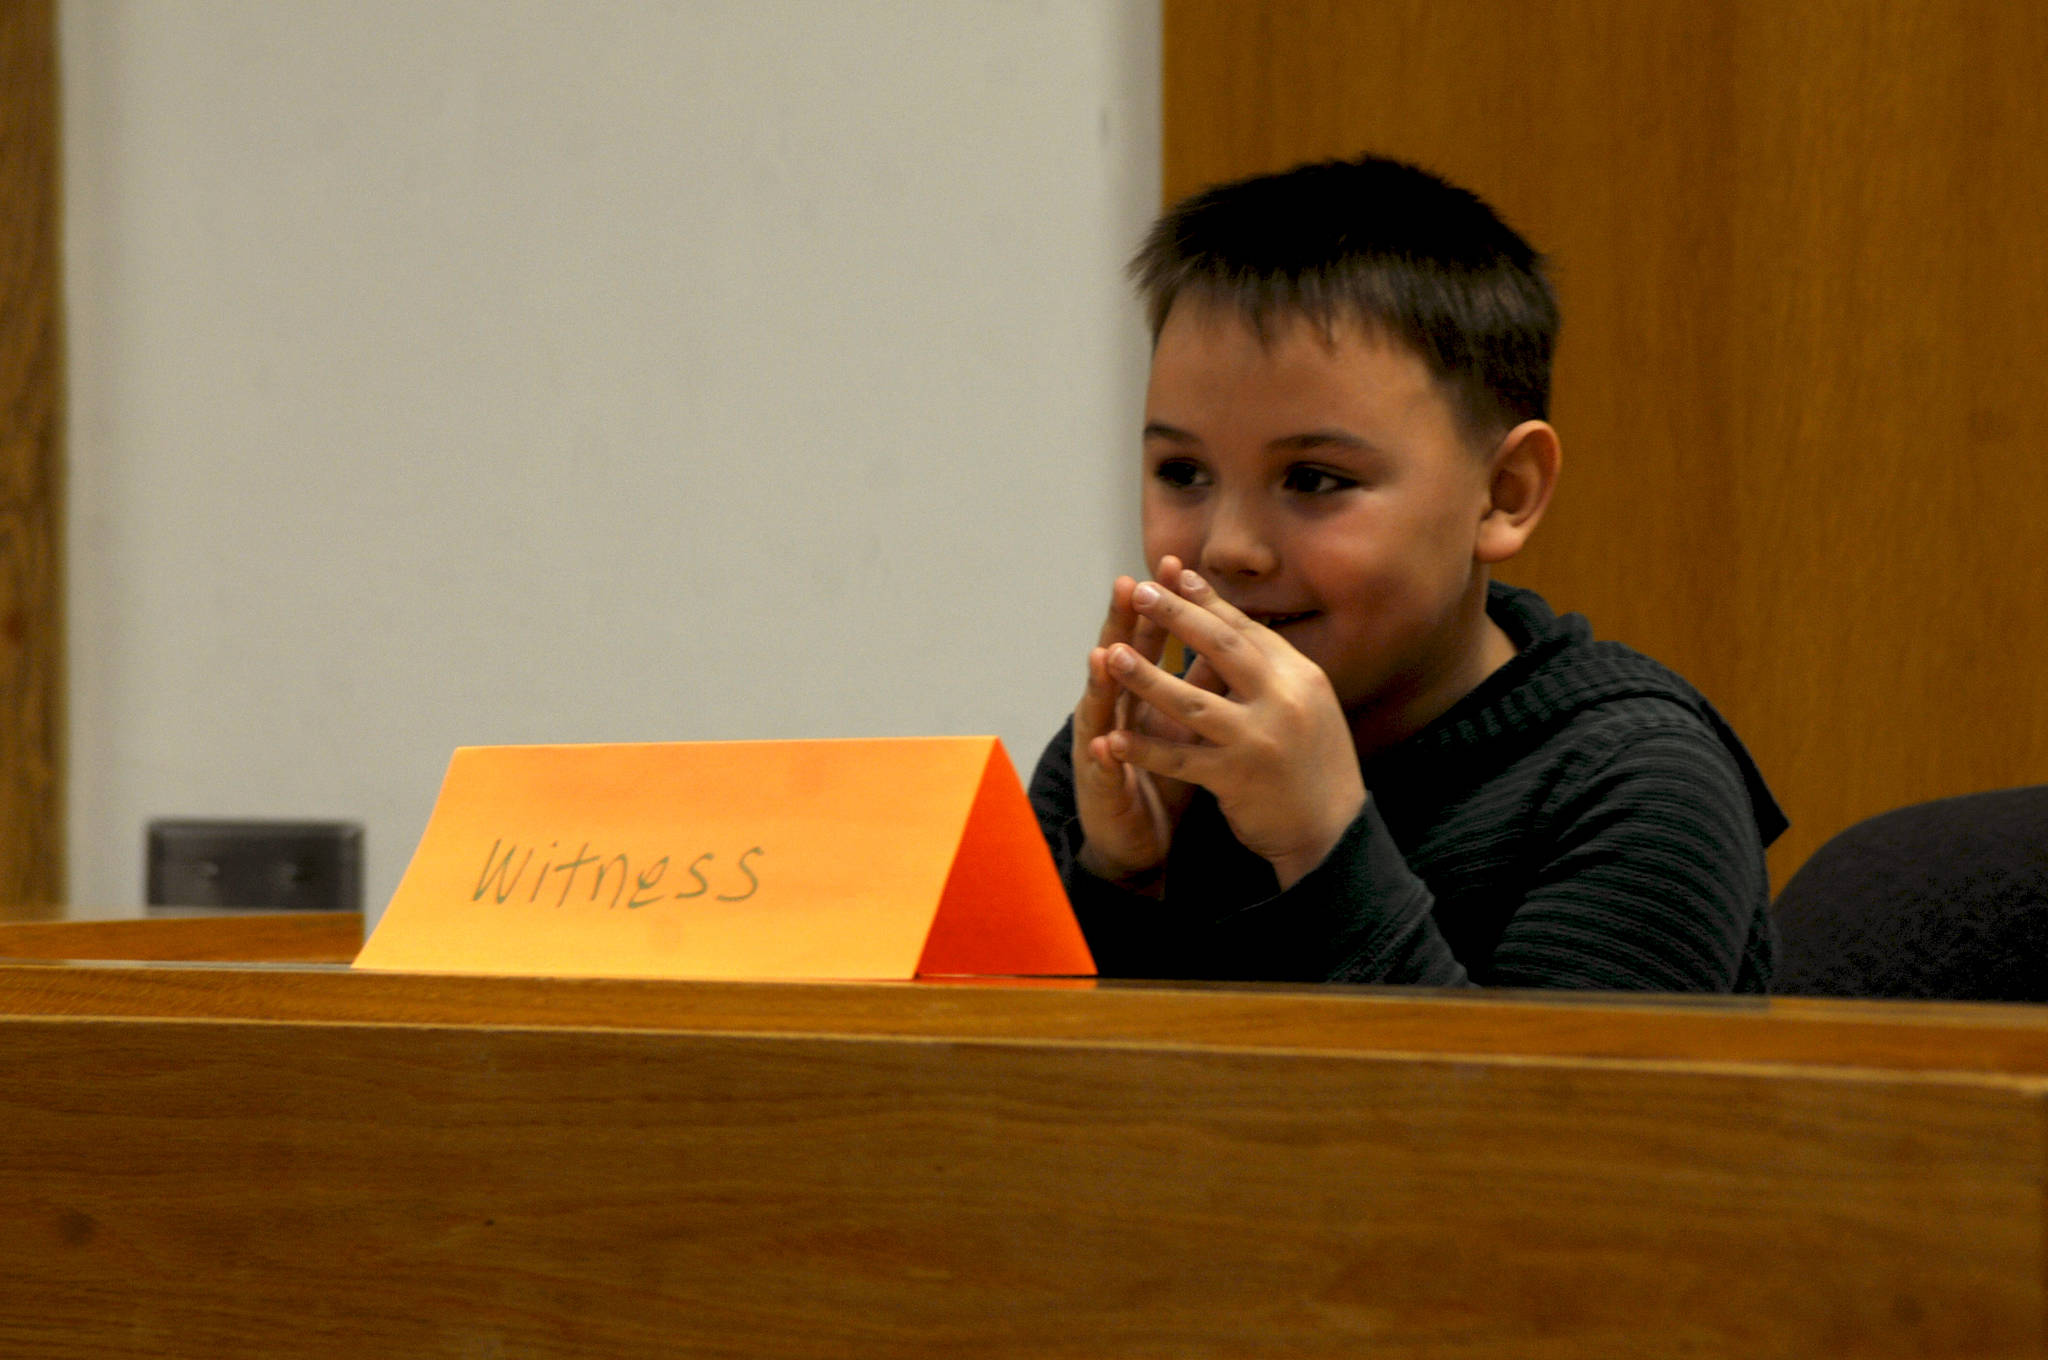 River Kruzick, a second-grader at Kalifornsky Beach Elementary School, prepares to answer a question during his testimony as “Arthur T. Grinch” during the class’s mock trial based on Dr. Seuss’s classic “How the Grinch Stole Christmas” on Thursday, Nov. 9, 2017 in Kenai, Alaska. The class has been studying civics and learning about the court process and put on a mock sentencing hearing, complete with witnesses and a jury composed of students’ parents and K-Beach Elementary Principal Nate Crabtree. (Photo by Elizabeth Earl/Peninsula Clarion)